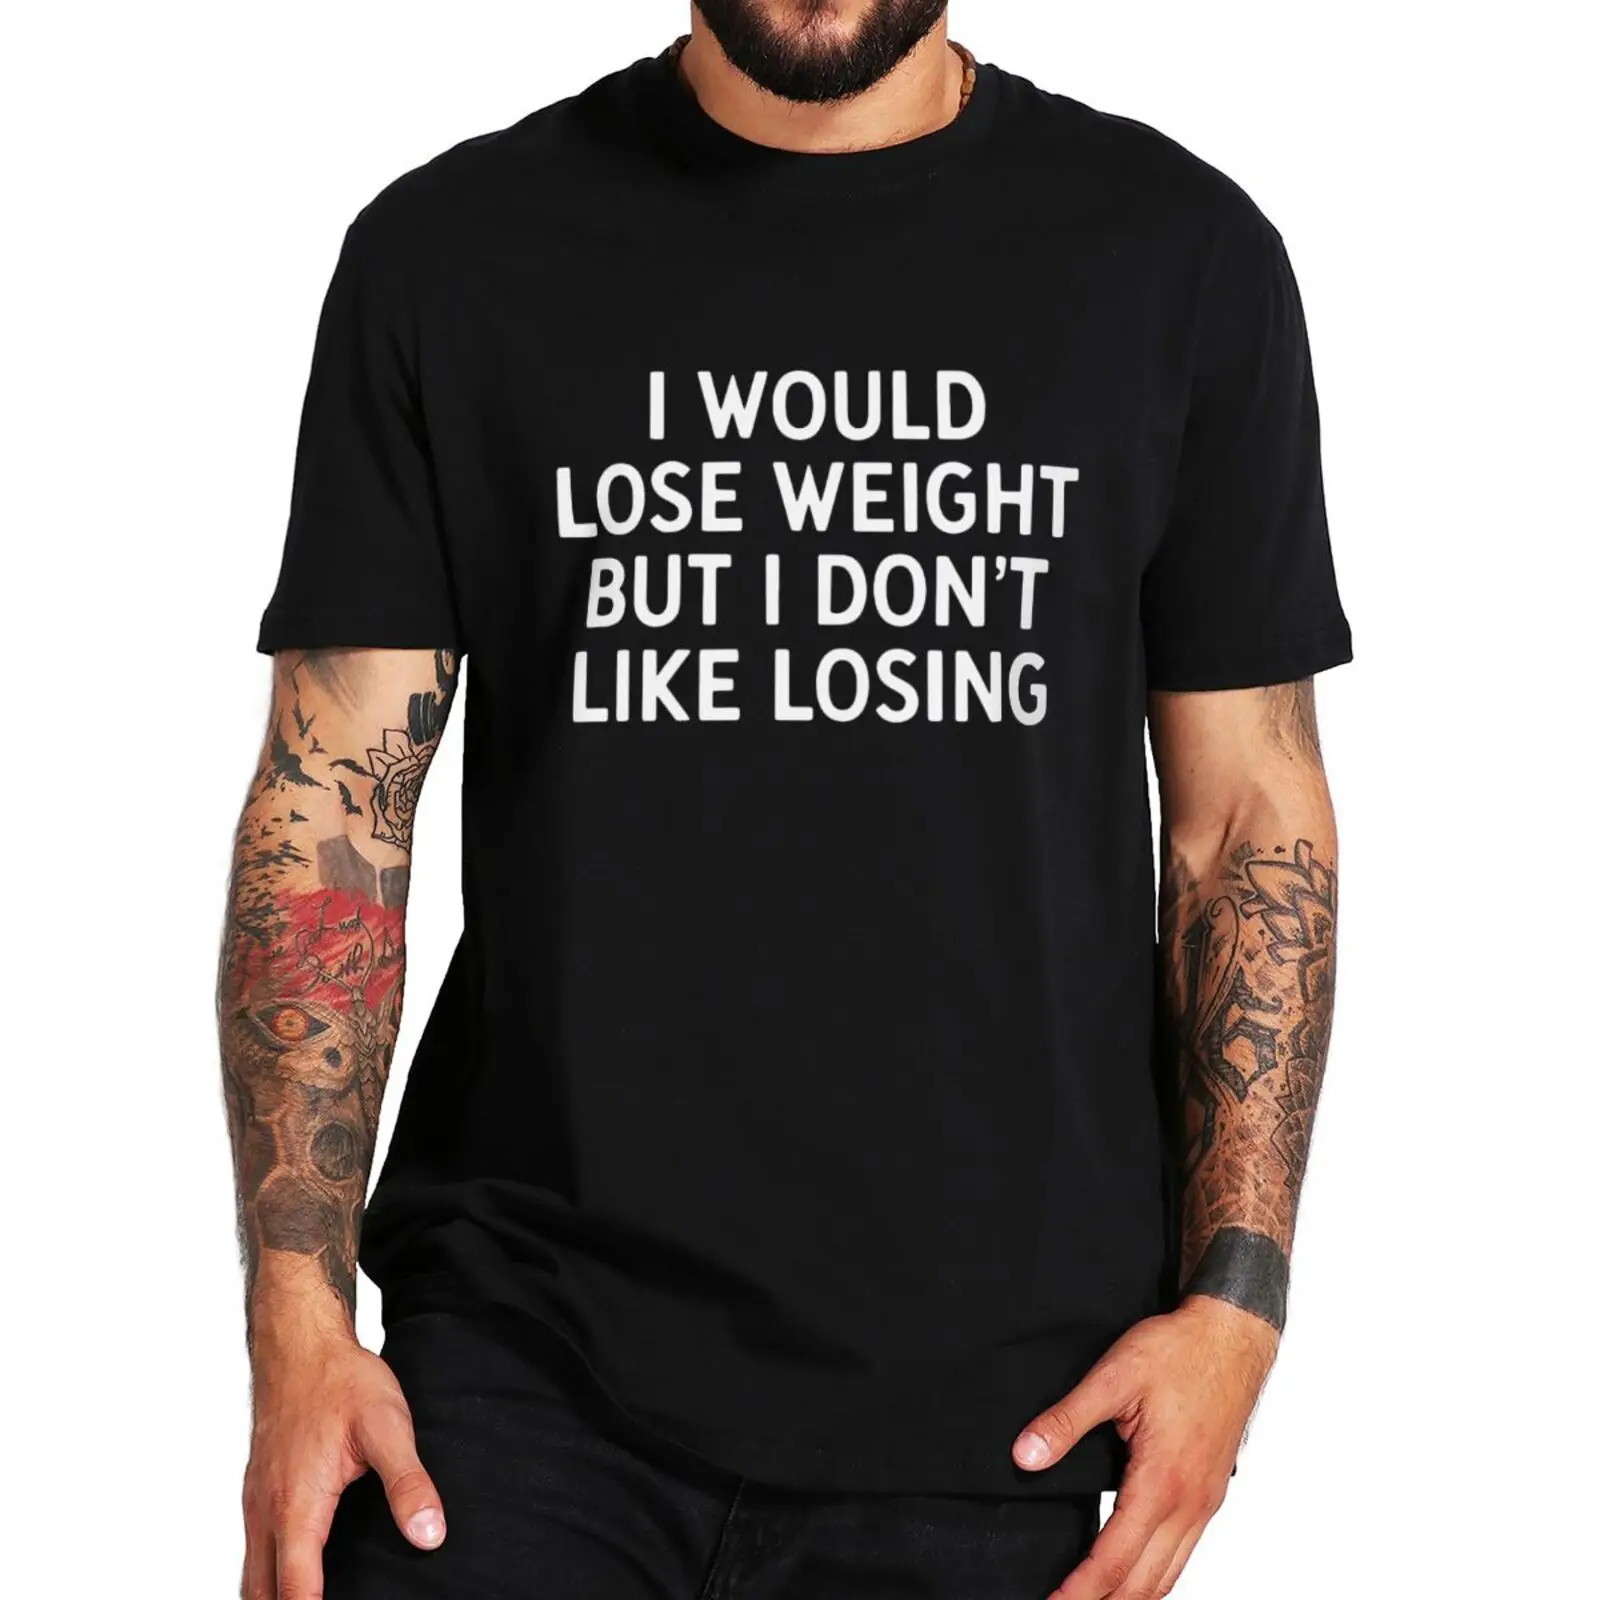 

I Would Lose Weight But I Don't Like Losing T Shirt Funny Jokes Short Sleeve Casual 100% Cotton Unisex Oversized Tops EU Size